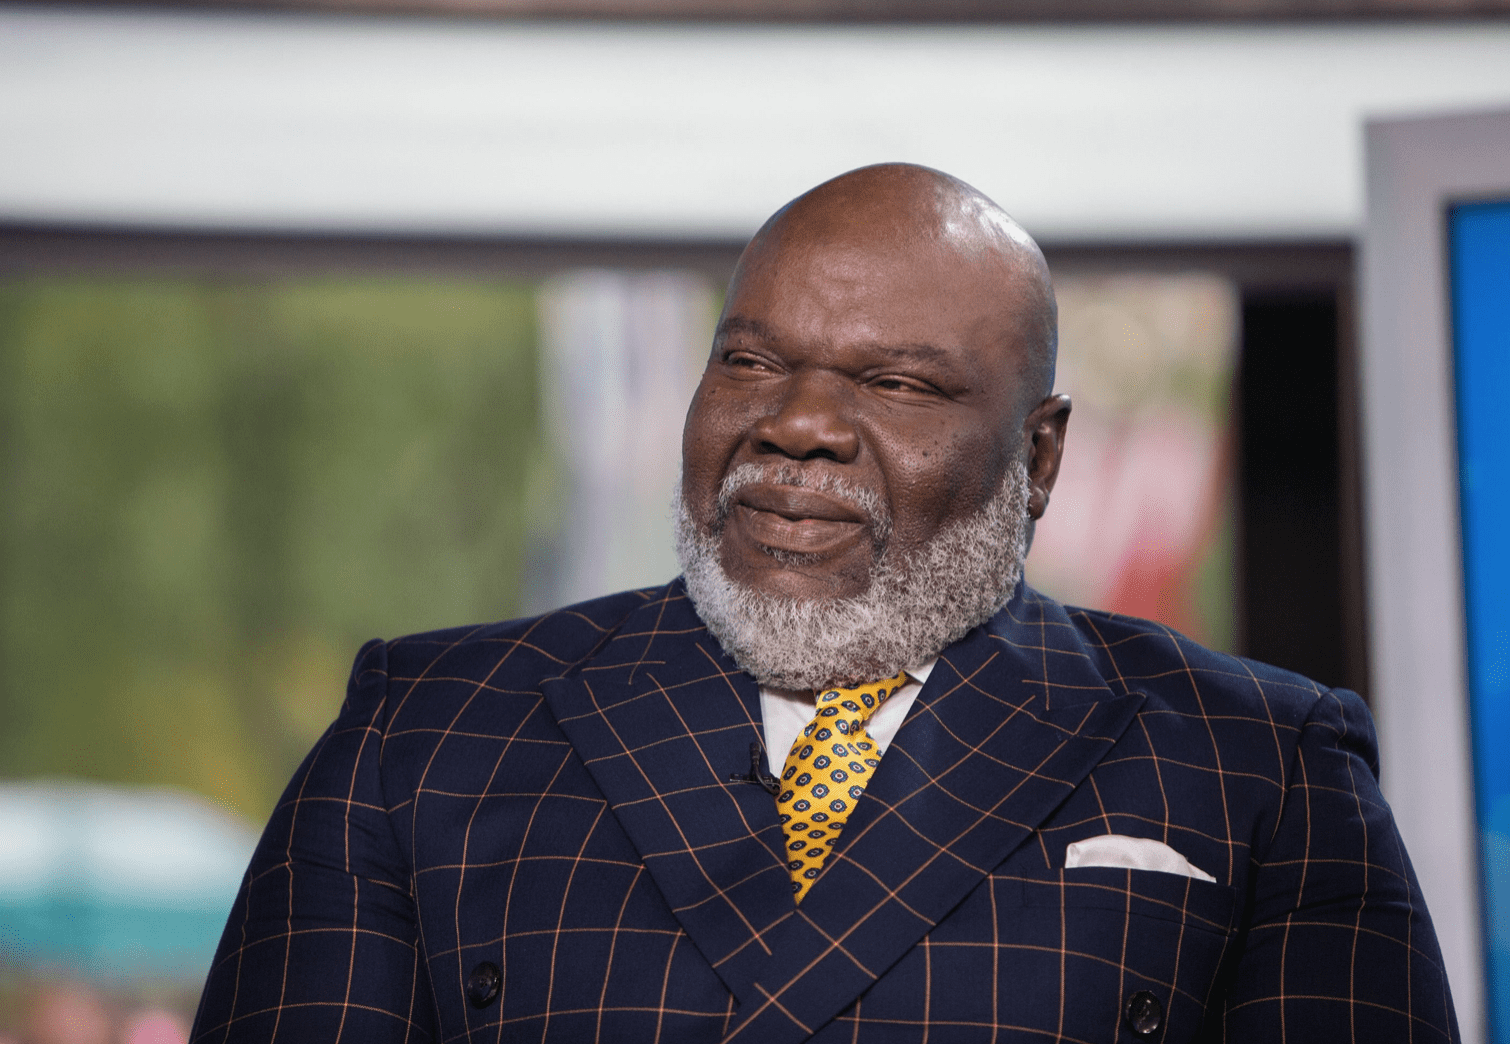 Bishop T.D. Jakes during a television interview on October 9, 2017. | Source: Getty Images